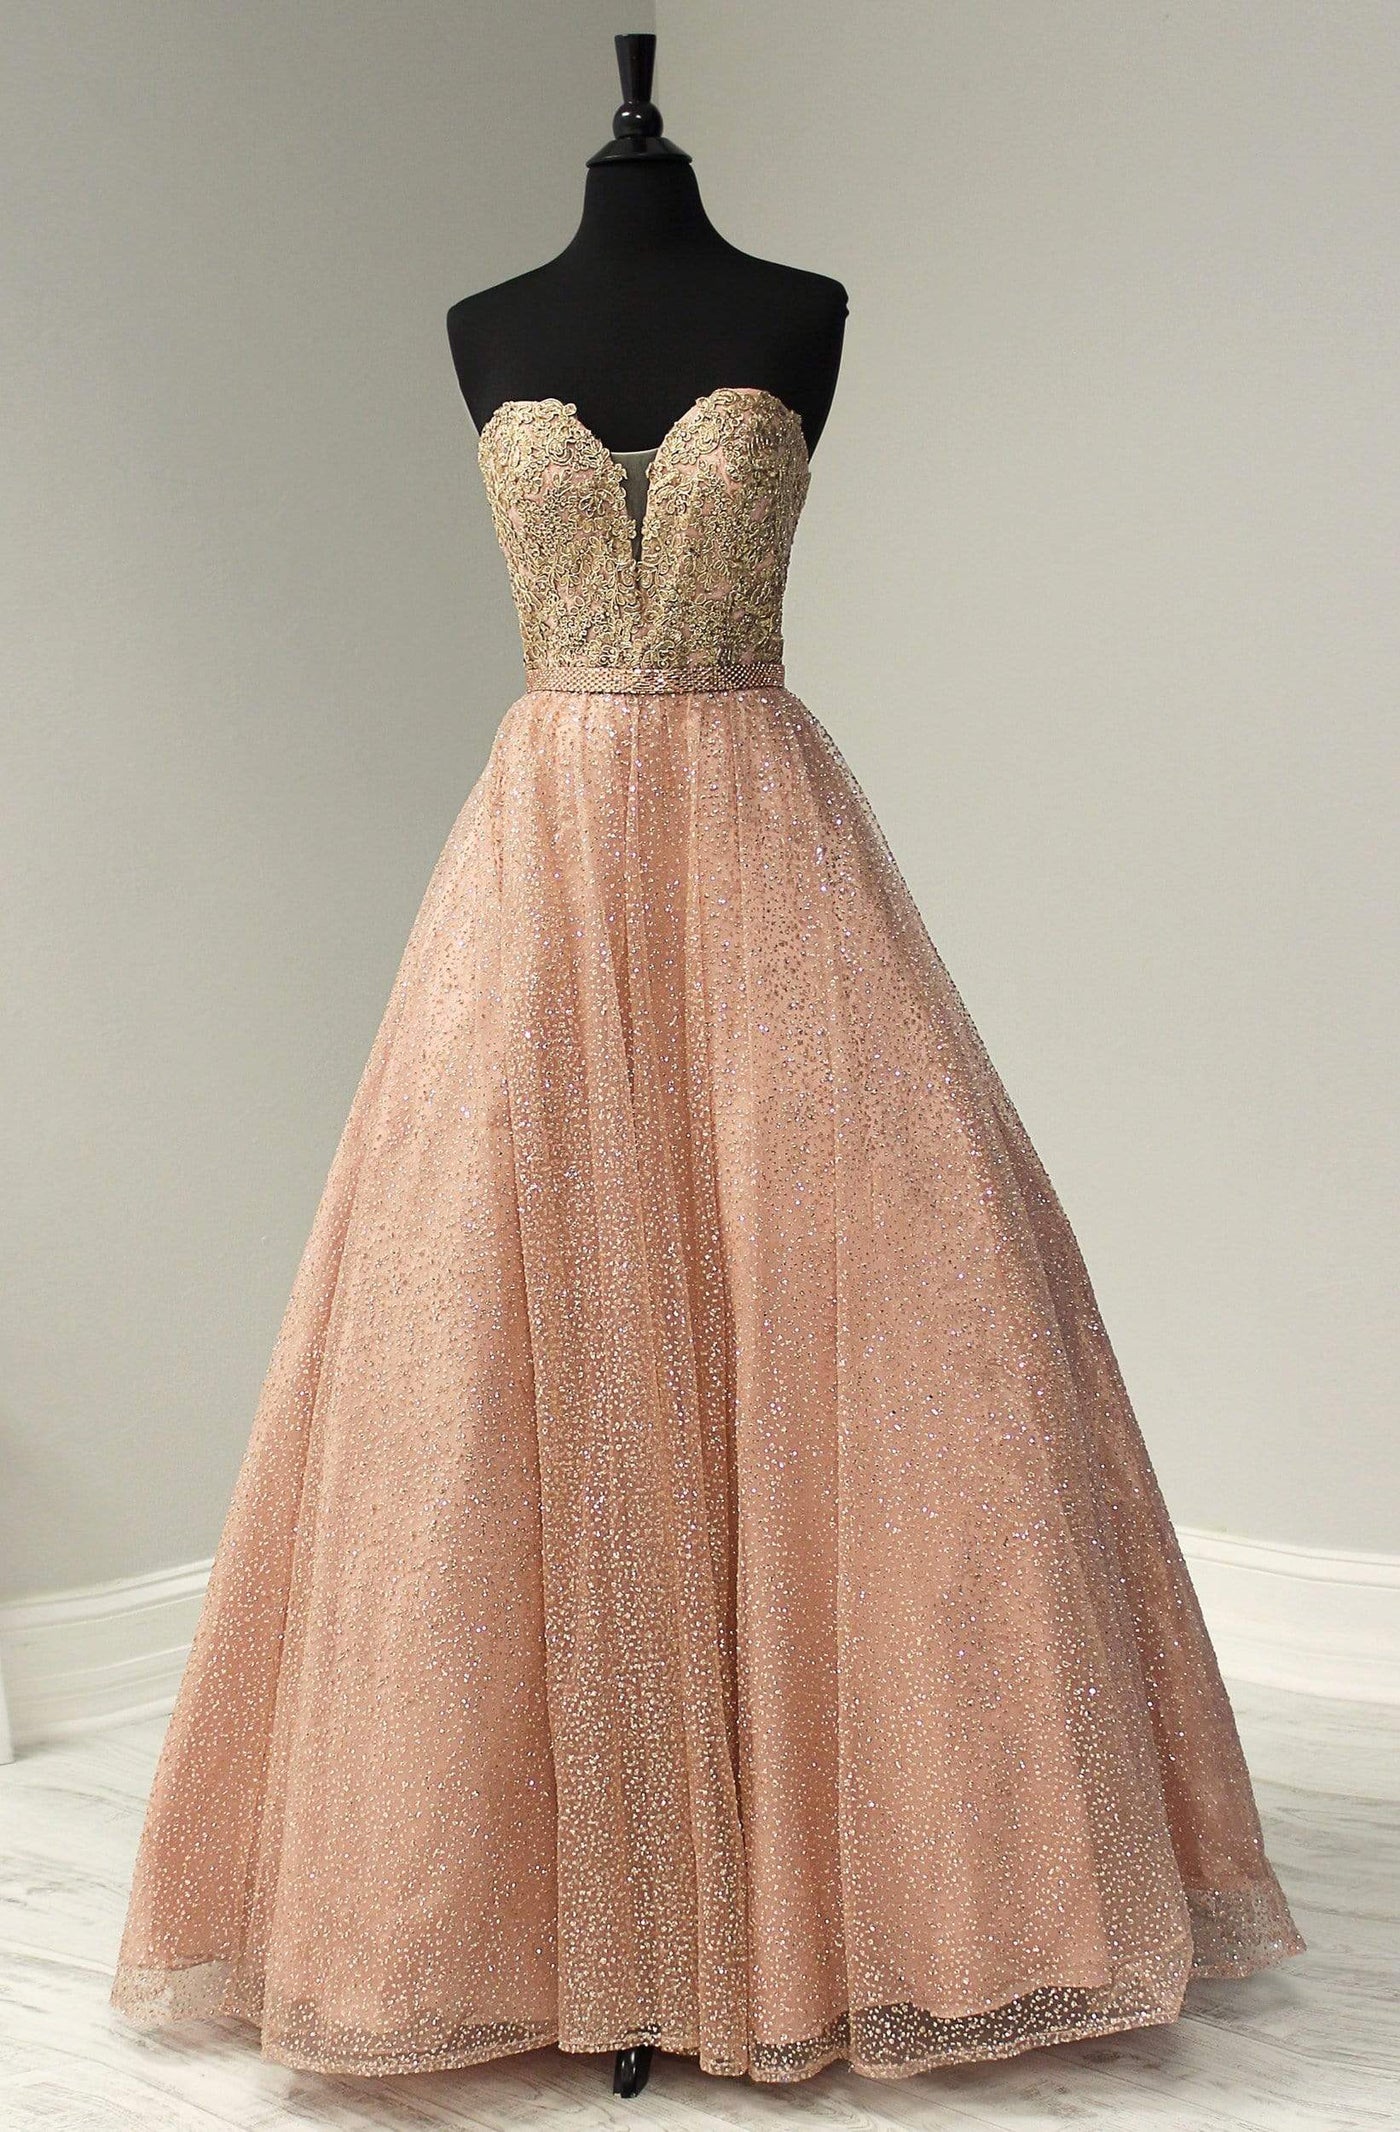 Tiffany Designs - 16355 Metallic Lace Sweetheart Bodice Gown Special Occasion Dress 0 / Rose/Rose Gold